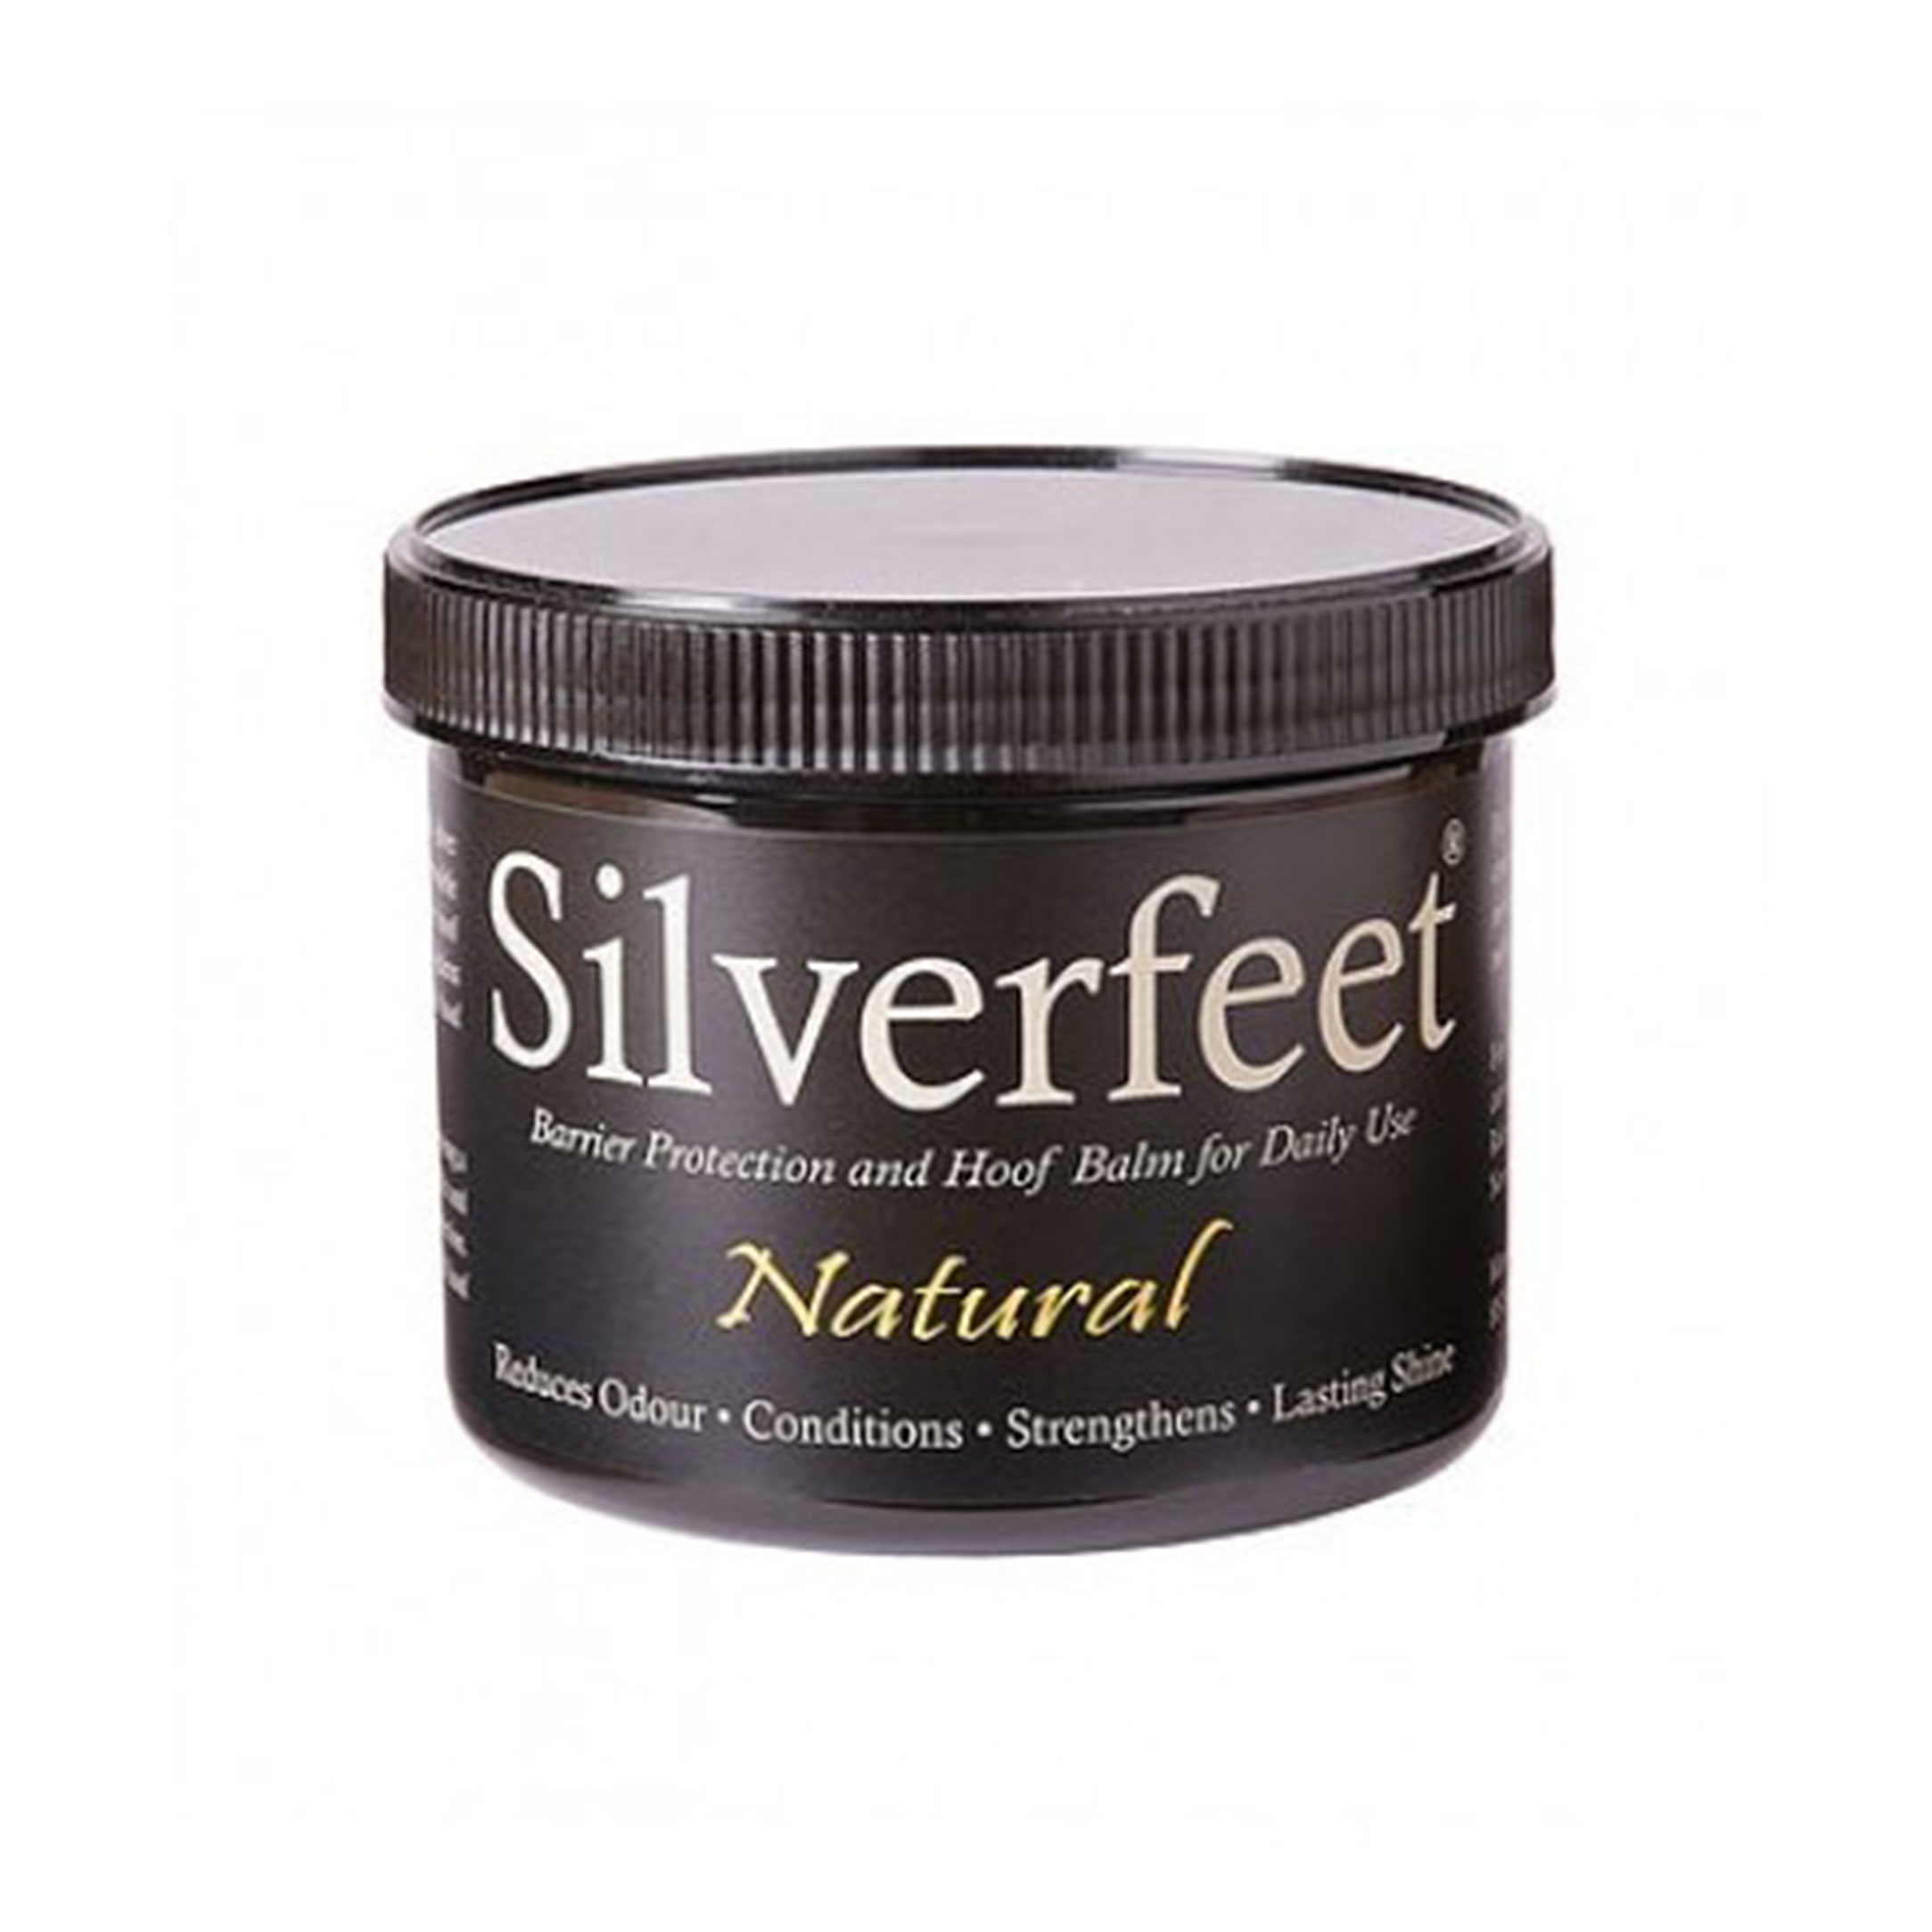 silverfoot